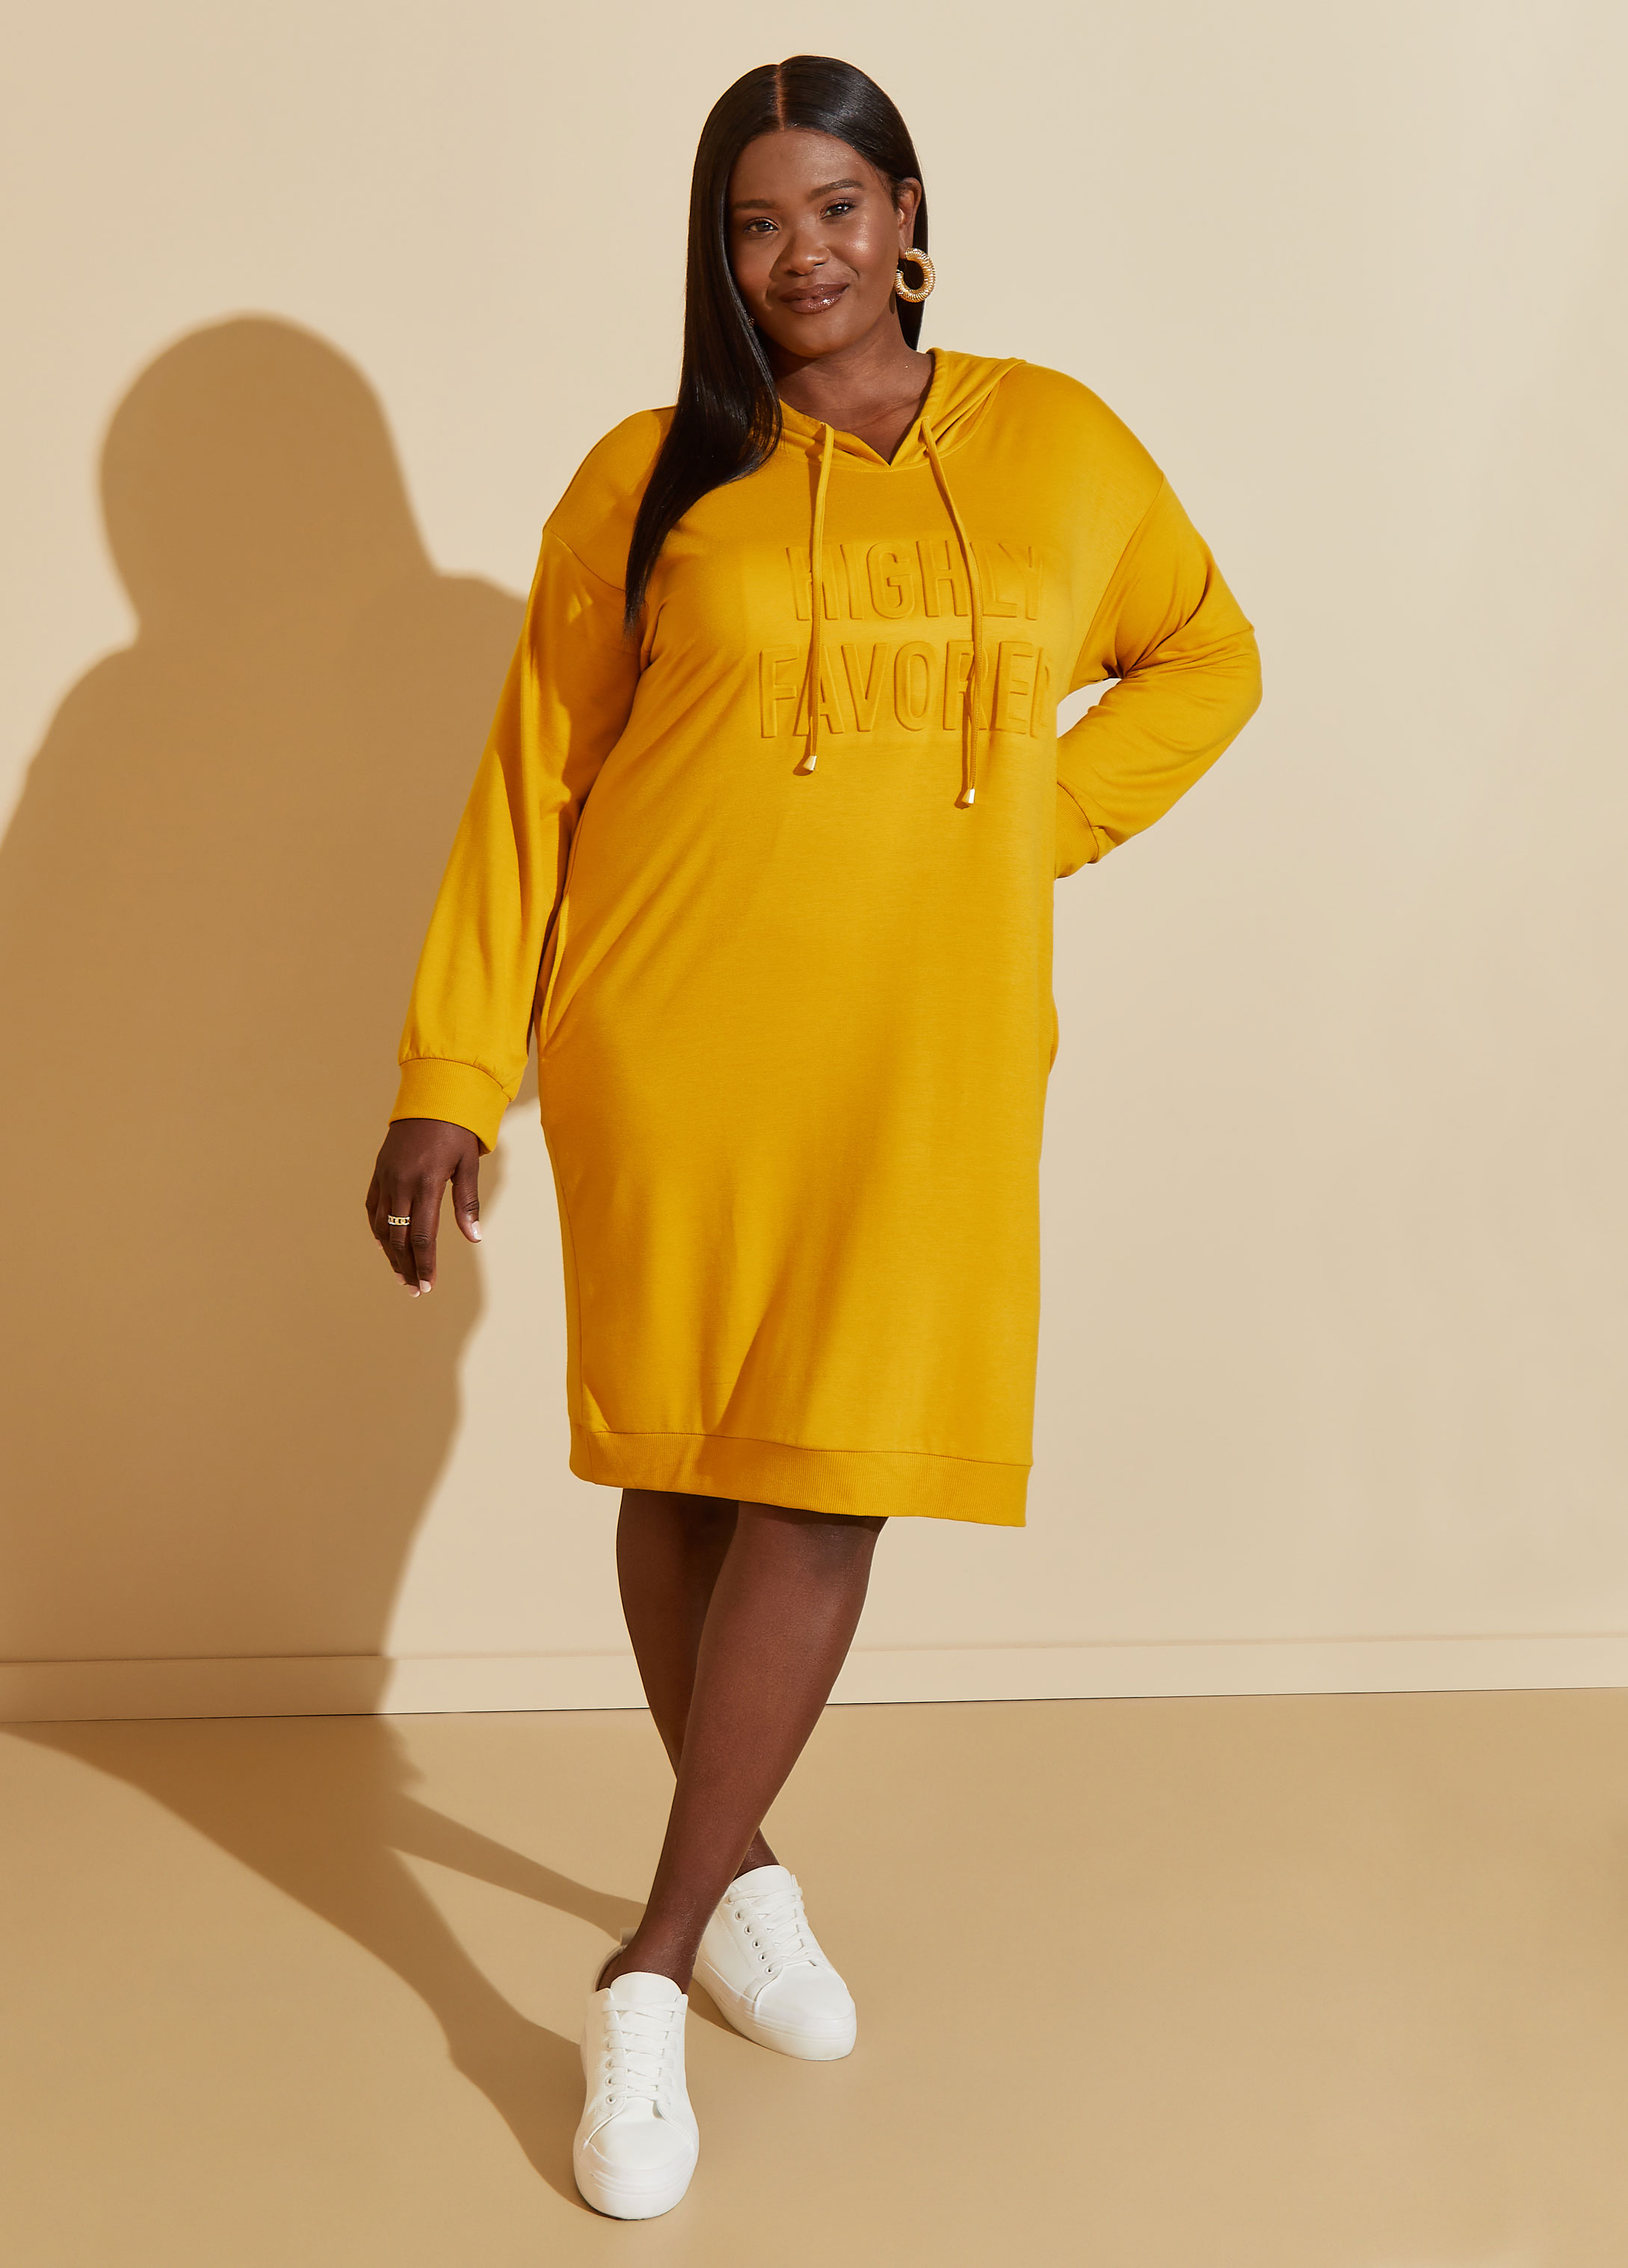 Plus Size Highly Favored Sneaker Dress, , 34/36 - Ashley Stewart